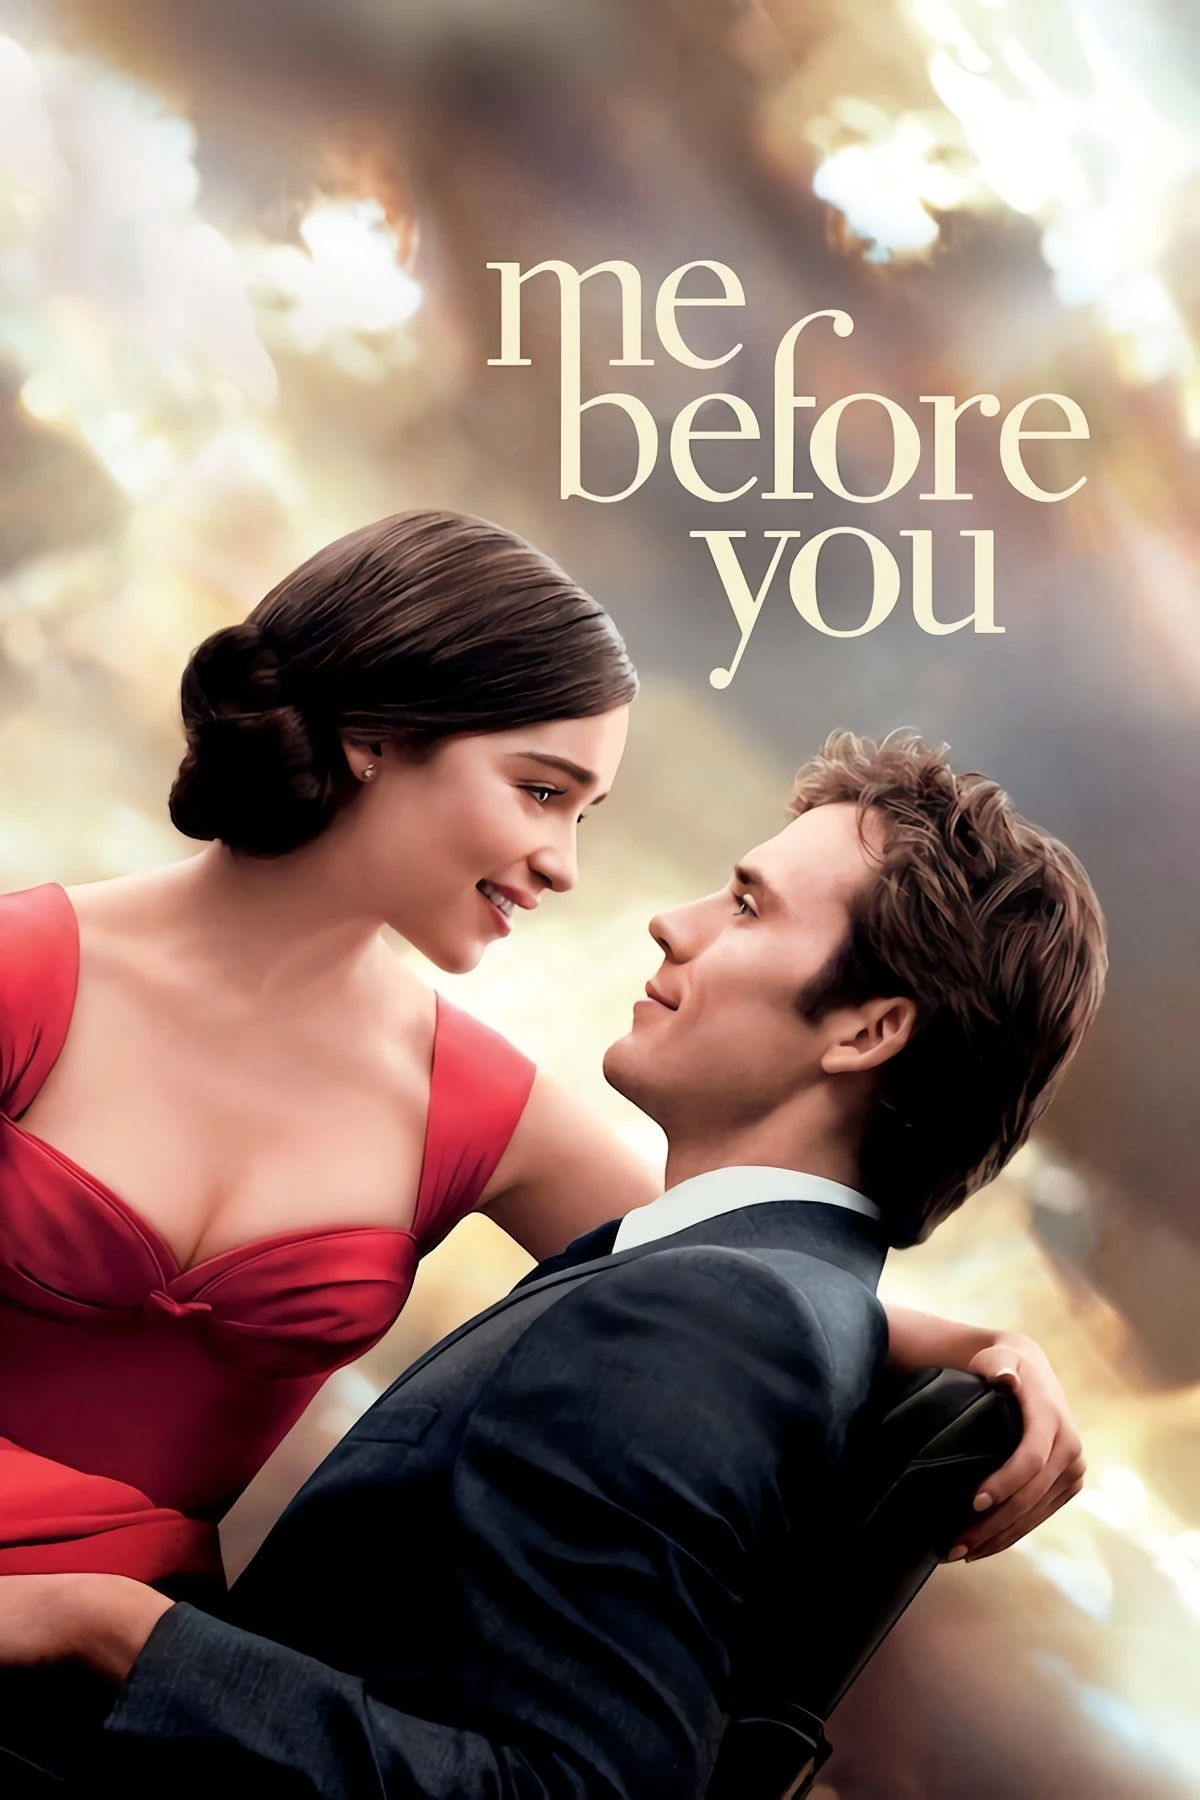 me before you movie poste